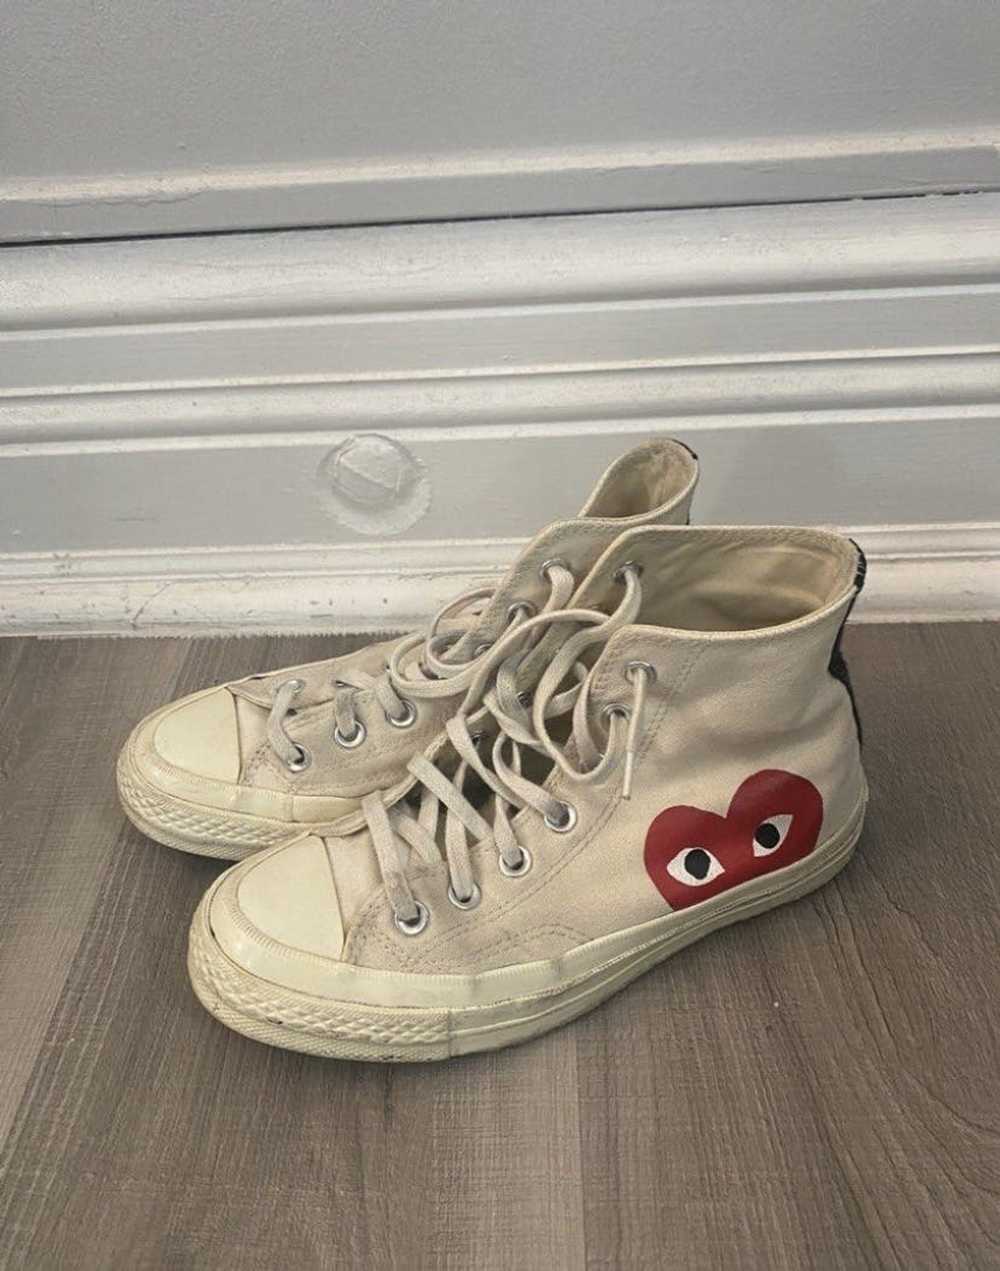 Comme des Garcons CDG High Top Sneakers - image 1